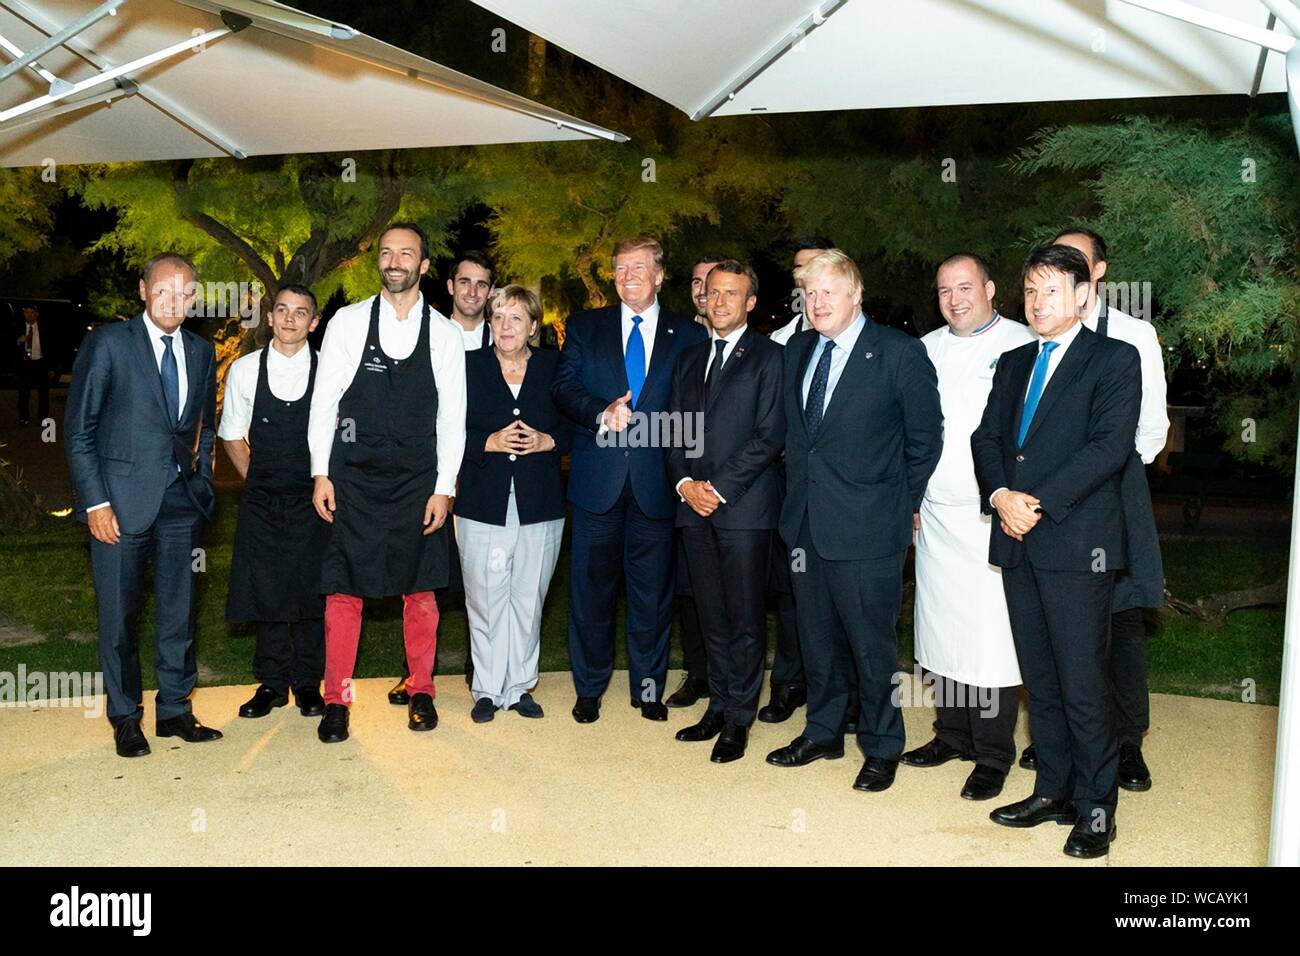 World leaders pose for a photo with the chef and staff following the G7 Leaders’ Dinner at the Biarritz Lighthouse August 24, 2019 in Biarritz, France. Standing from left to right are: European Council President Donald Tusk, restaurant staff, German Chancellor Angela Merkel, U.S. President Donald Trump, French Prime Minister Emmanuel Macron, British Prime Minister Boris Johnson and Italian Prime Minister Giuseppe Conte. Stock Photo